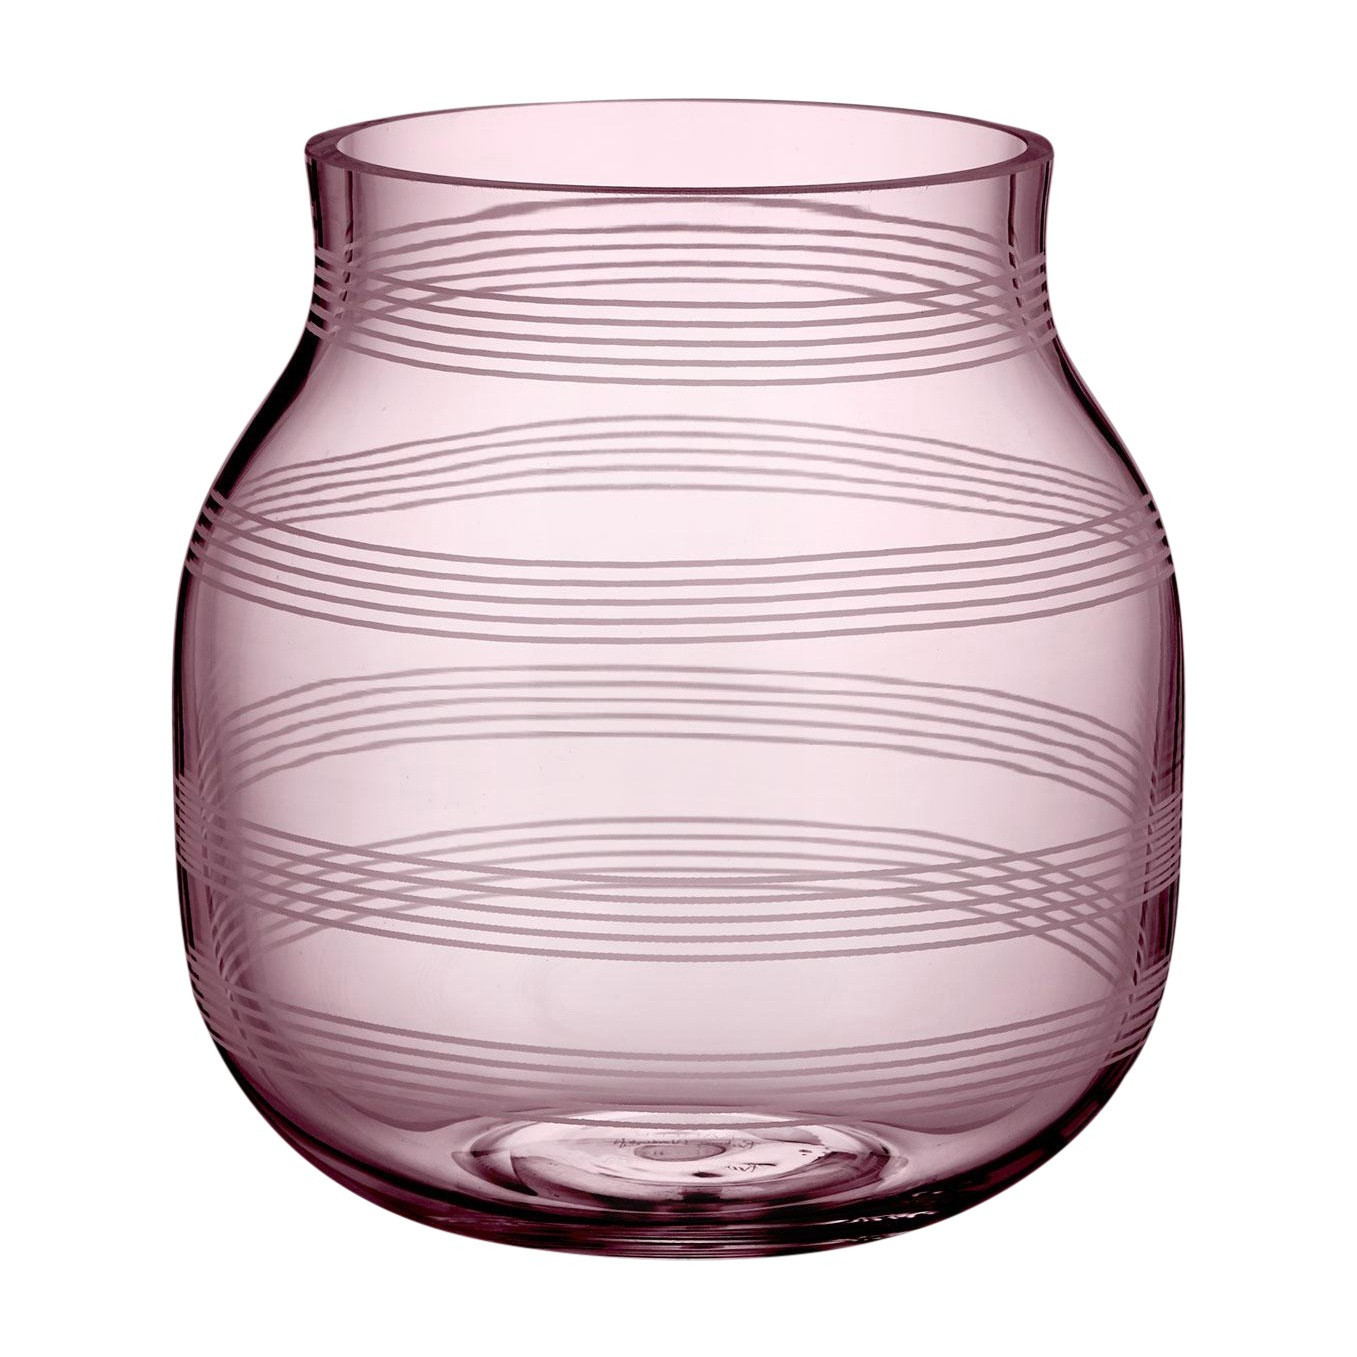 13 Best Square Glass Vases for Sale 2024 free download square glass vases for sale of kac2a4hler omaggio glass vase h 17cm ambientedirect intended for kaehler omaggio glasvase h 17cm 1357x1357 id1922376 cdd758e4260a859ee9db9bec5014a957